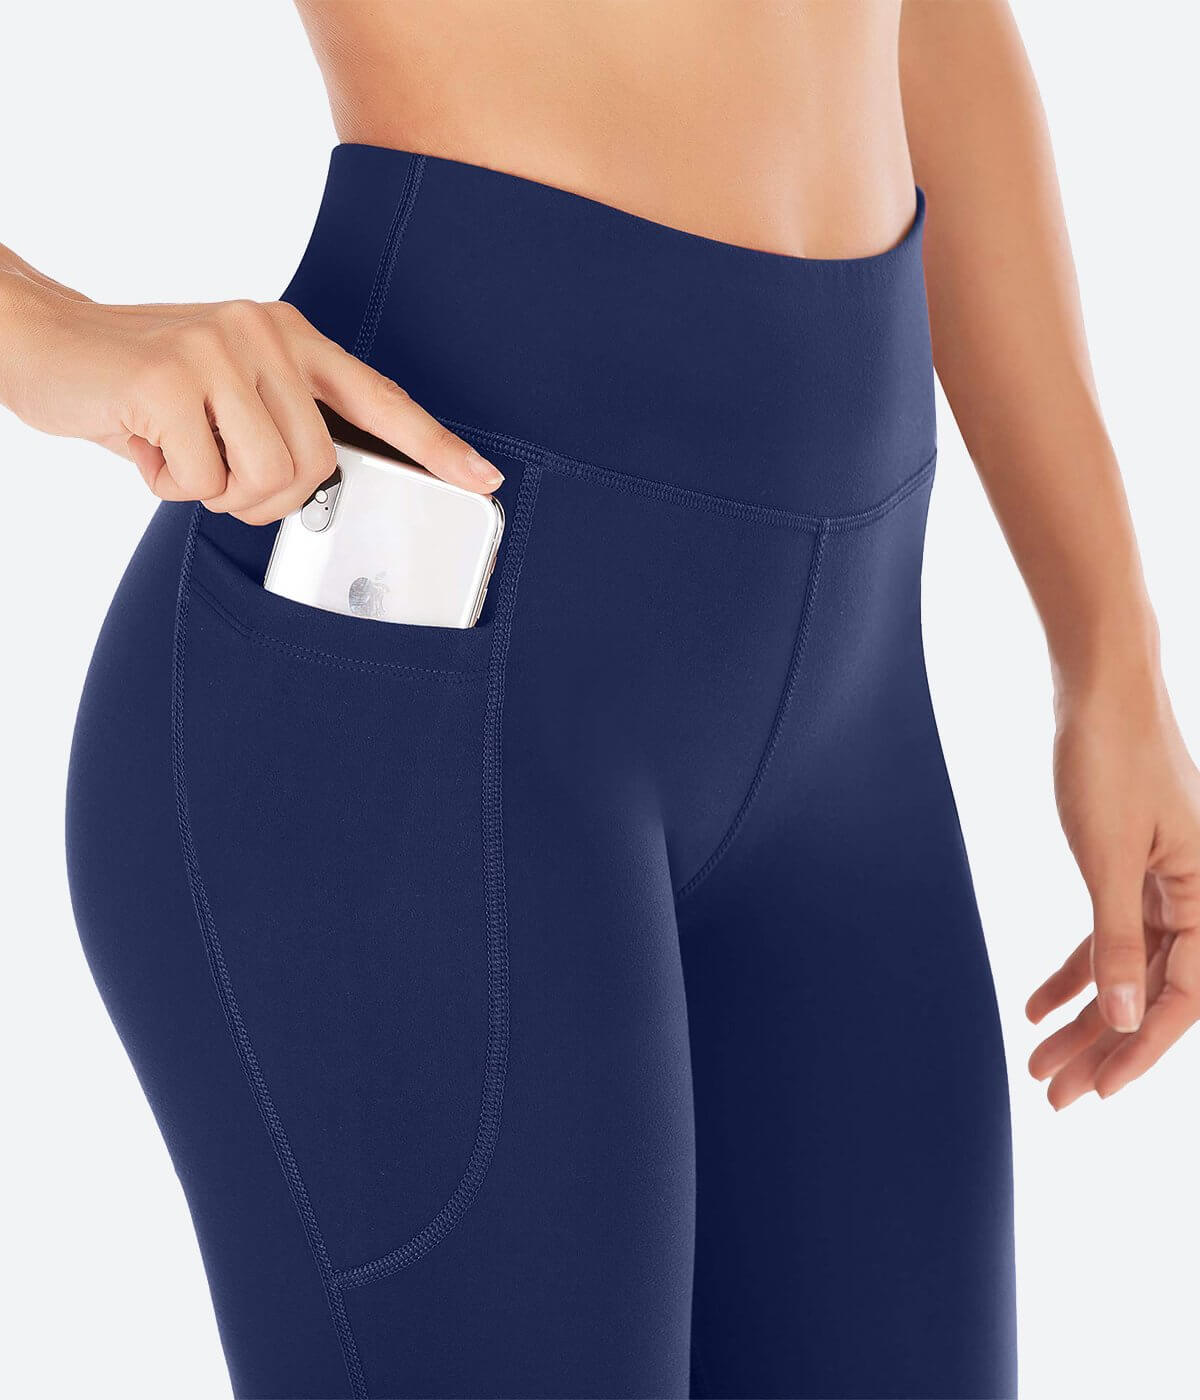 Best Deal for Yoga Pants for Women with Pockets, Womens Bubble